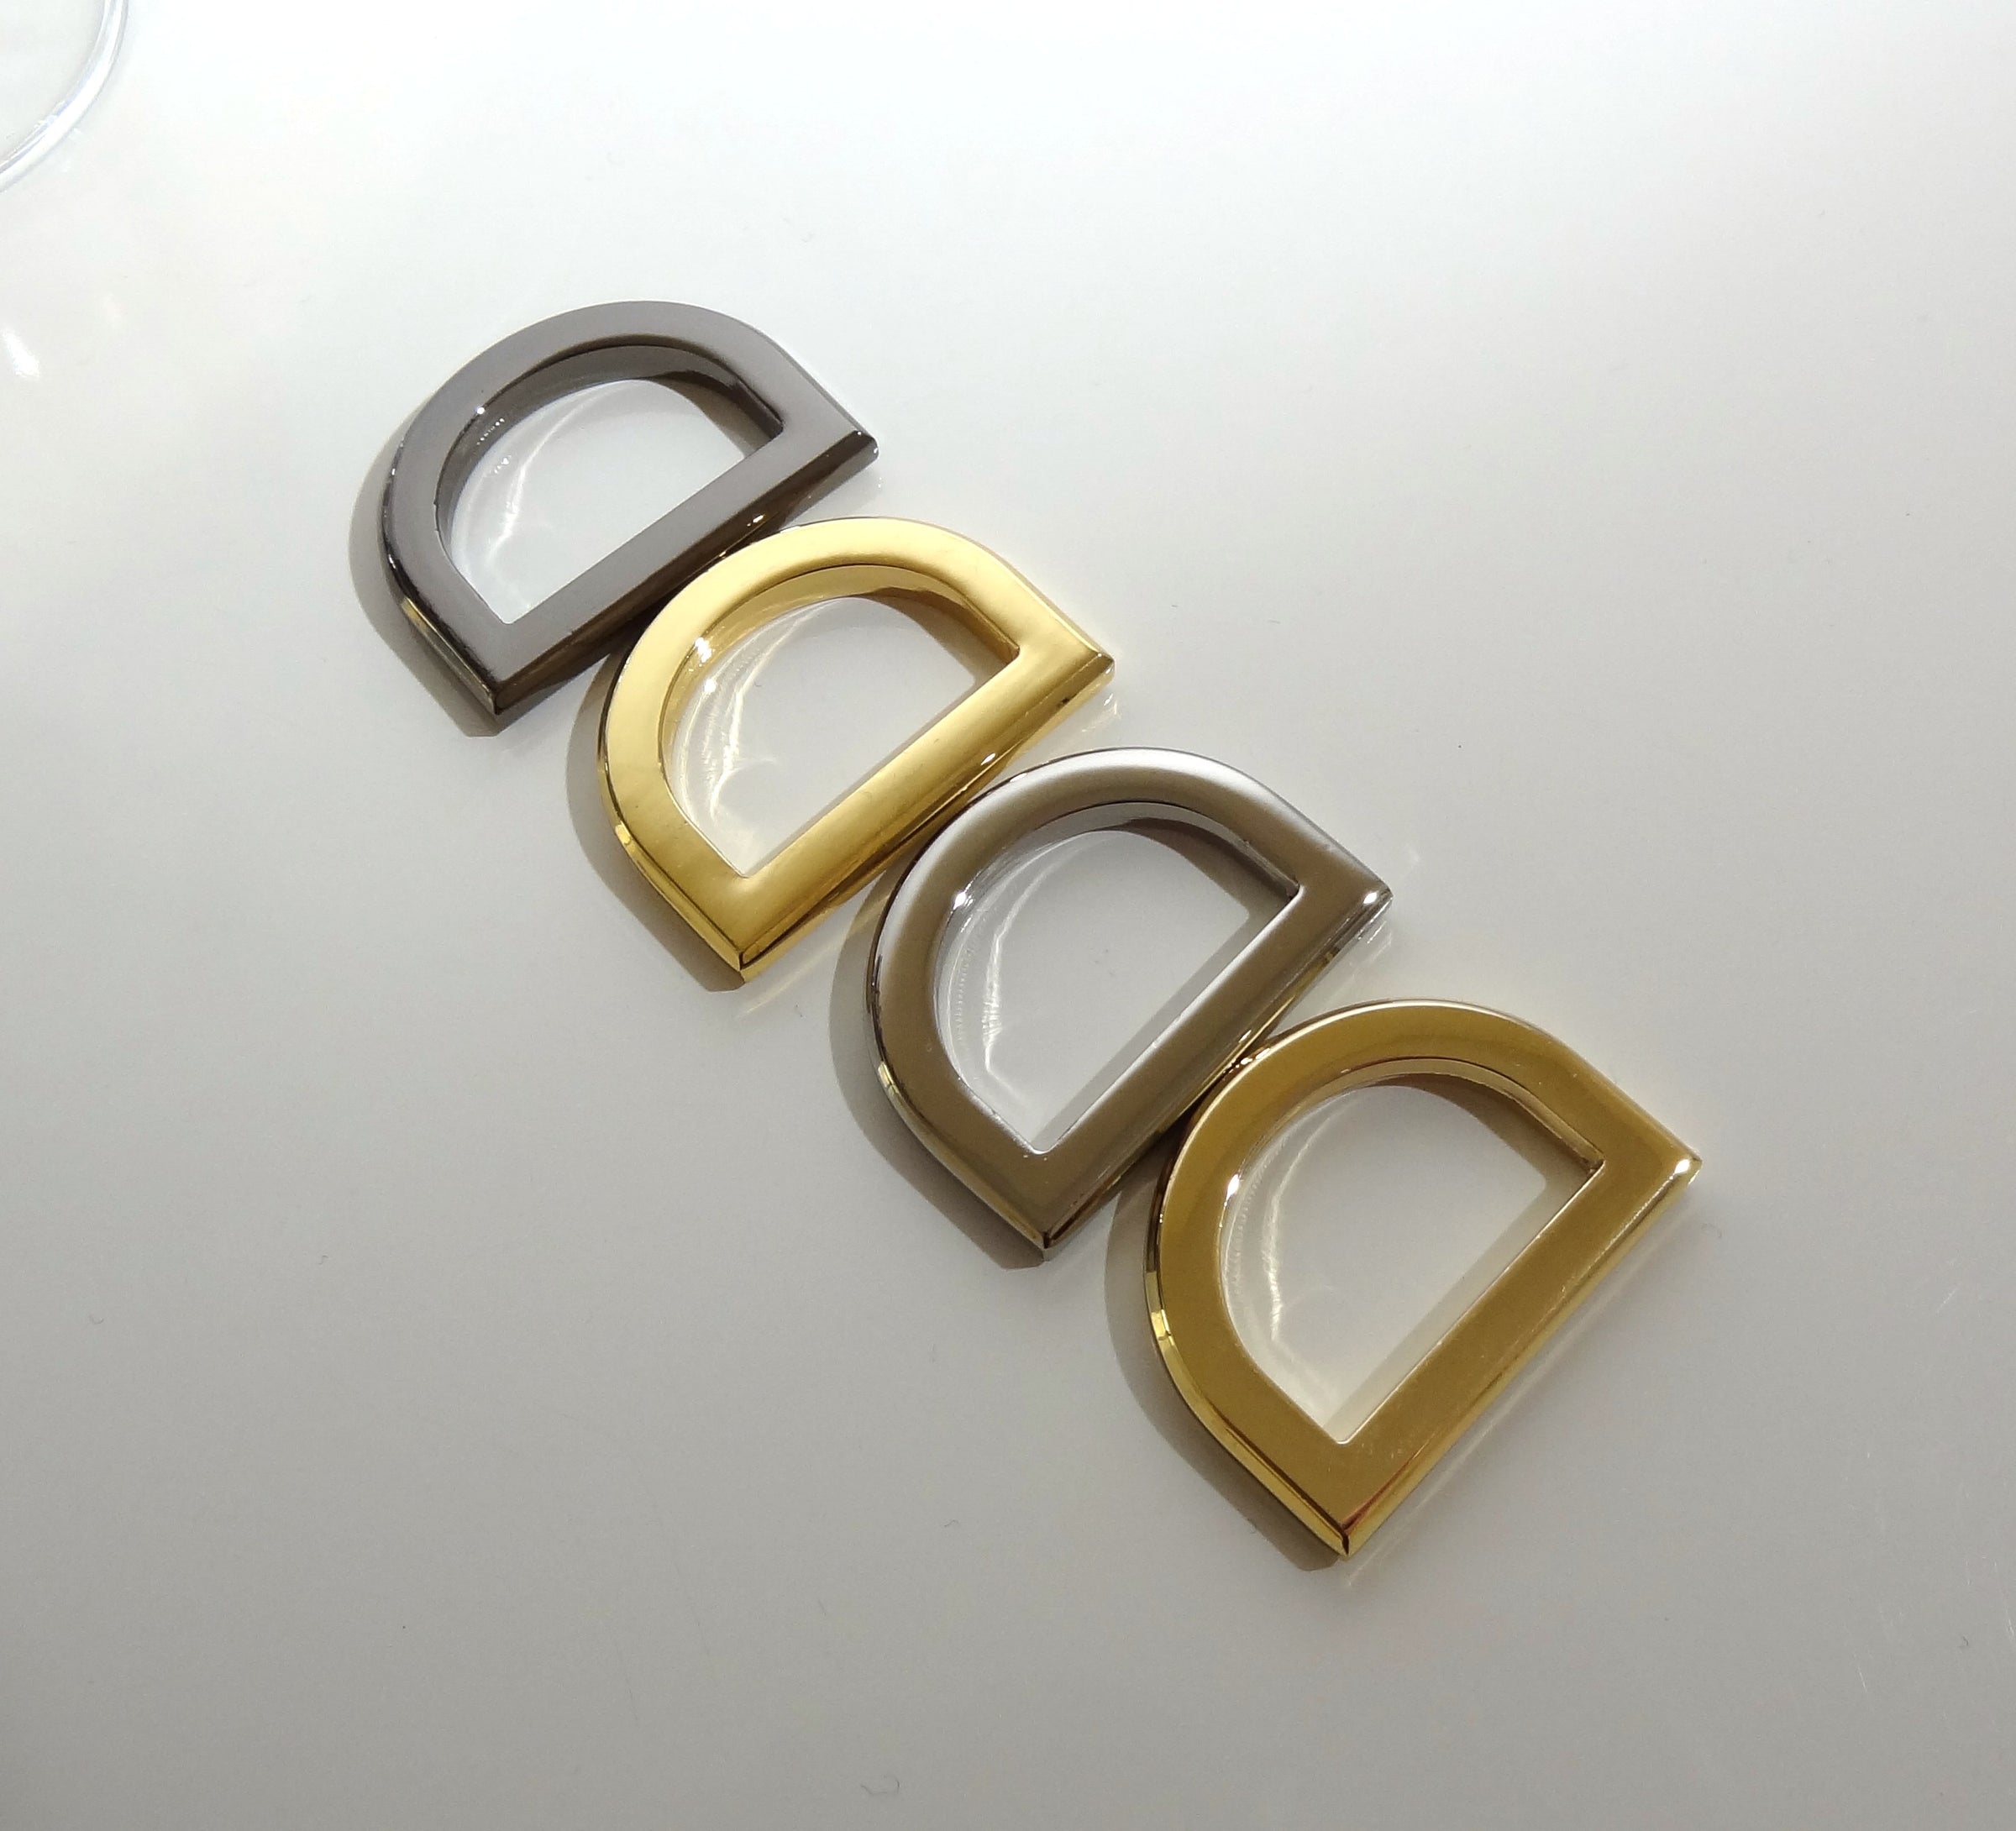 1 Inch Flat Cast D Ring Gold Finish 6 Pieces 25 Mm D-ring 